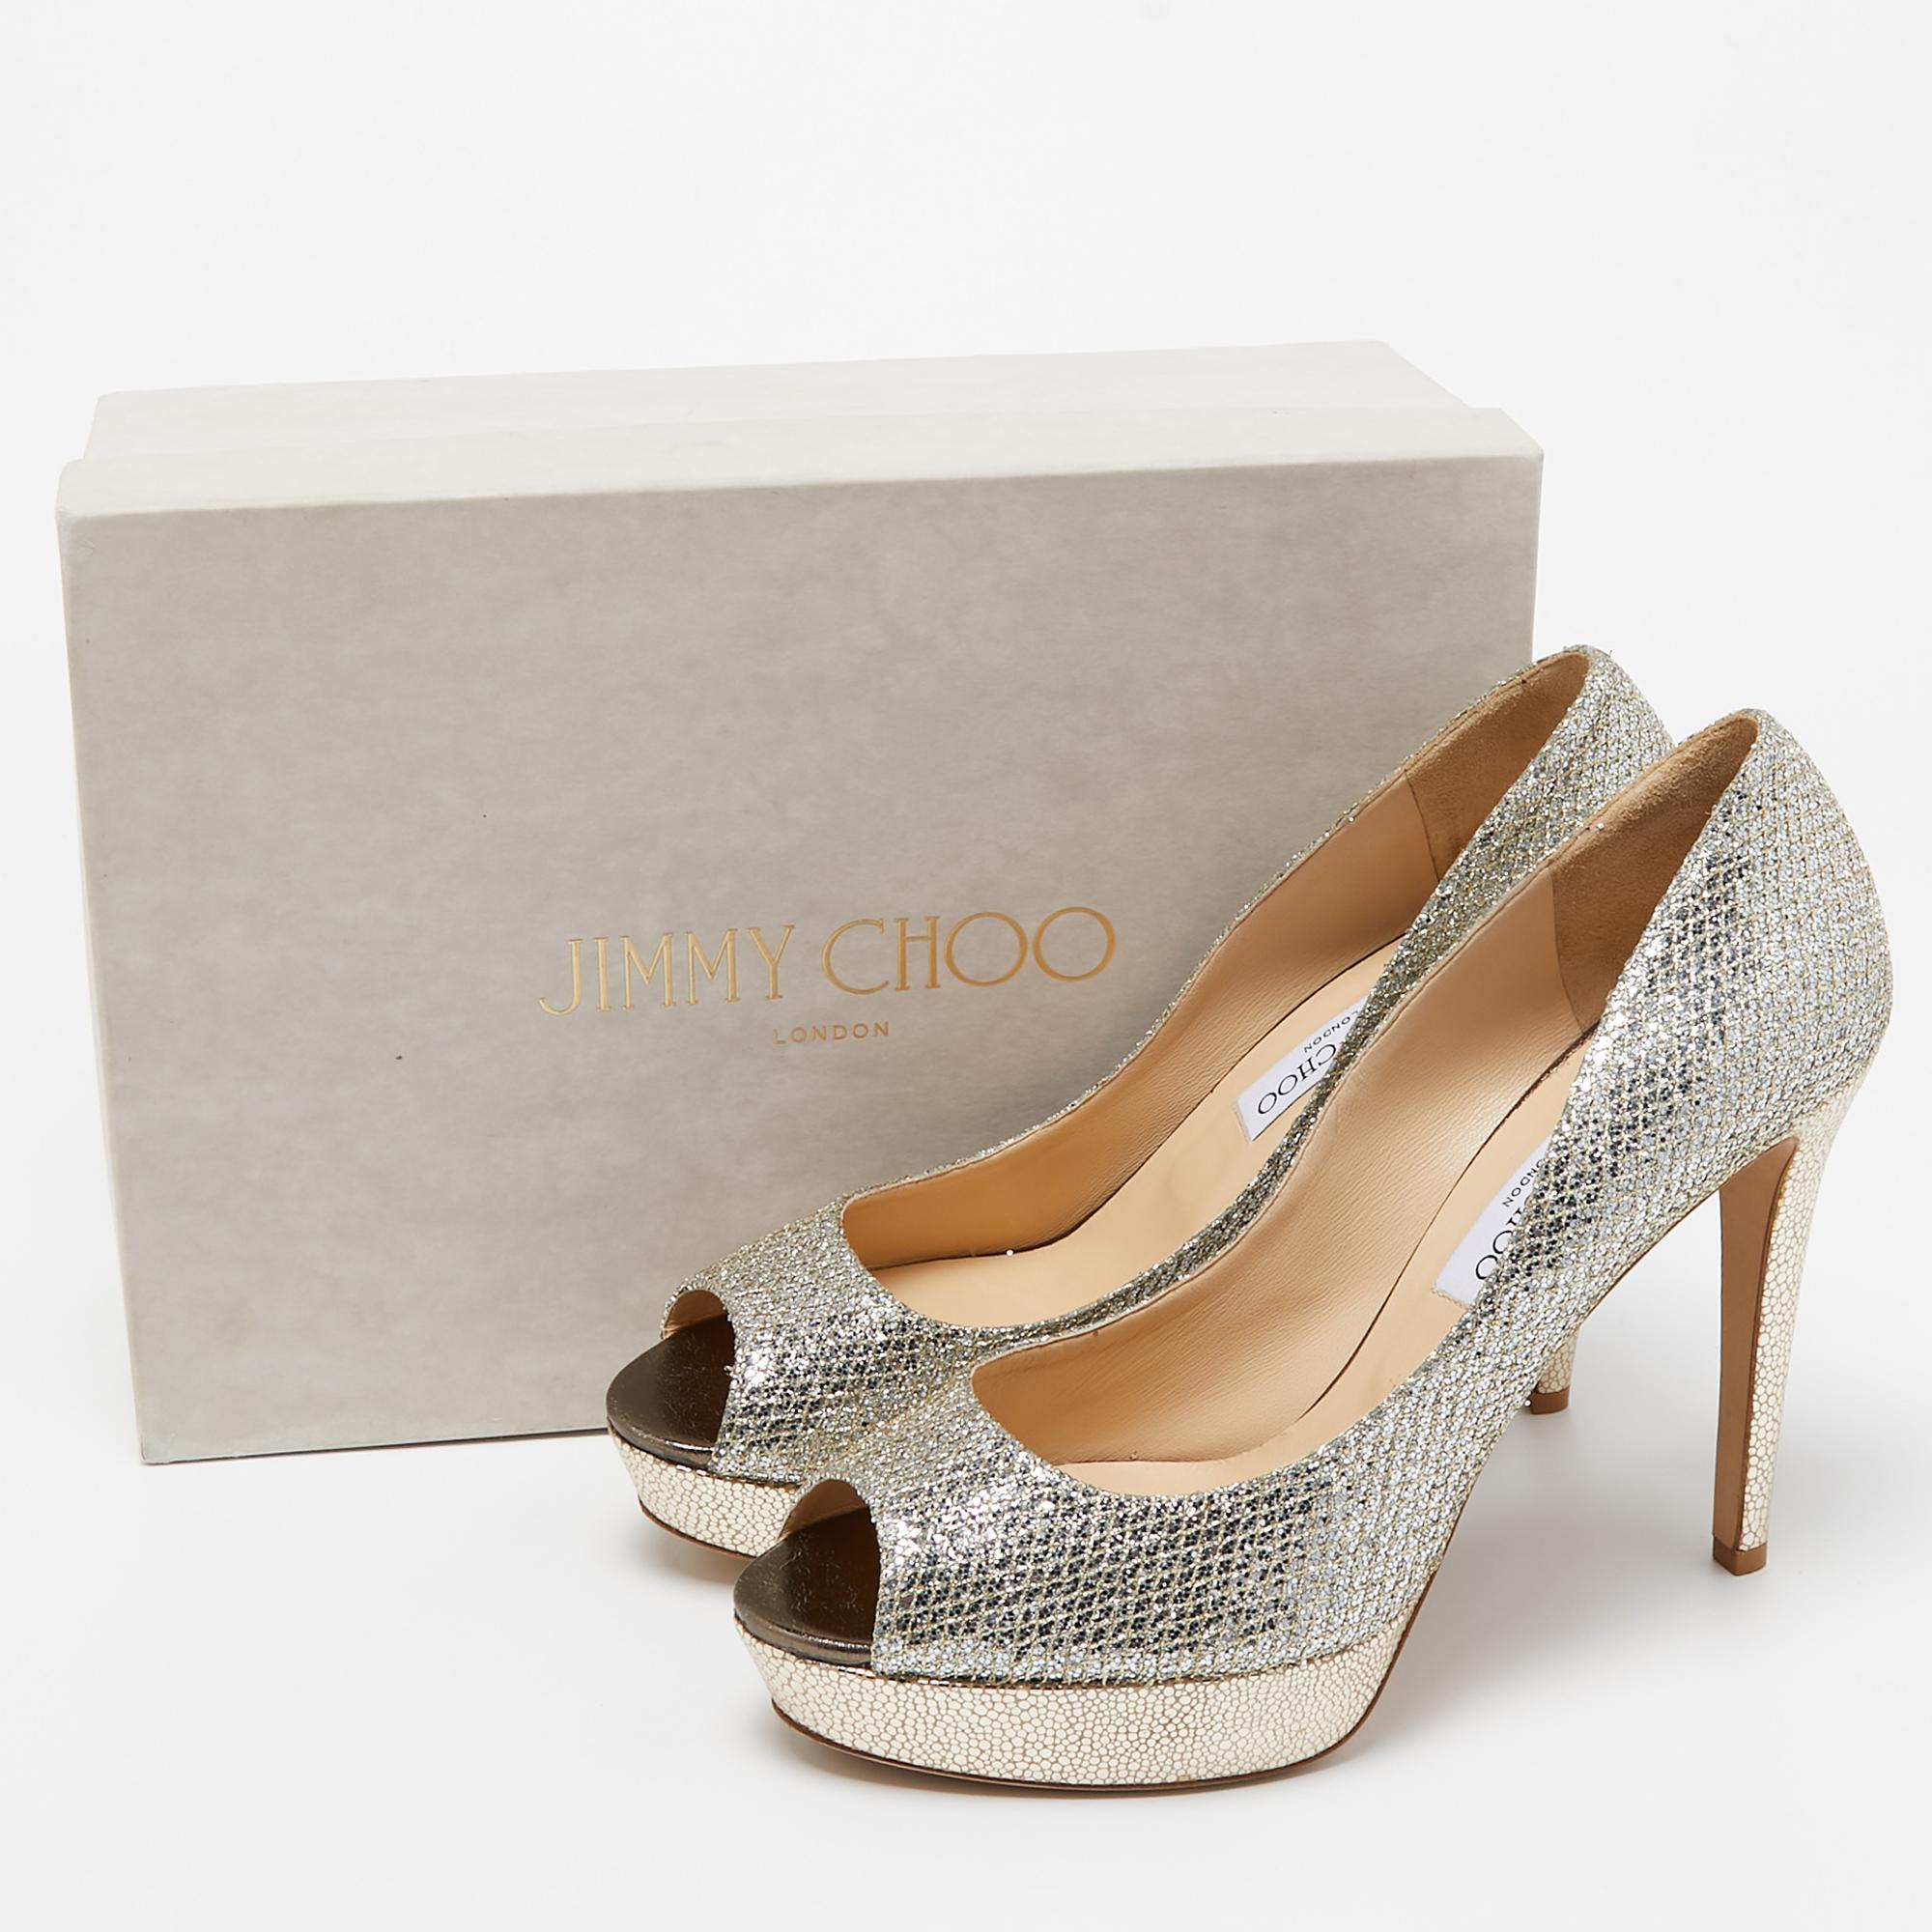 Jimmy Choo Gold/Silver Glitter and Leather Dahlia Peep Toe Pumps Size 41.5 3